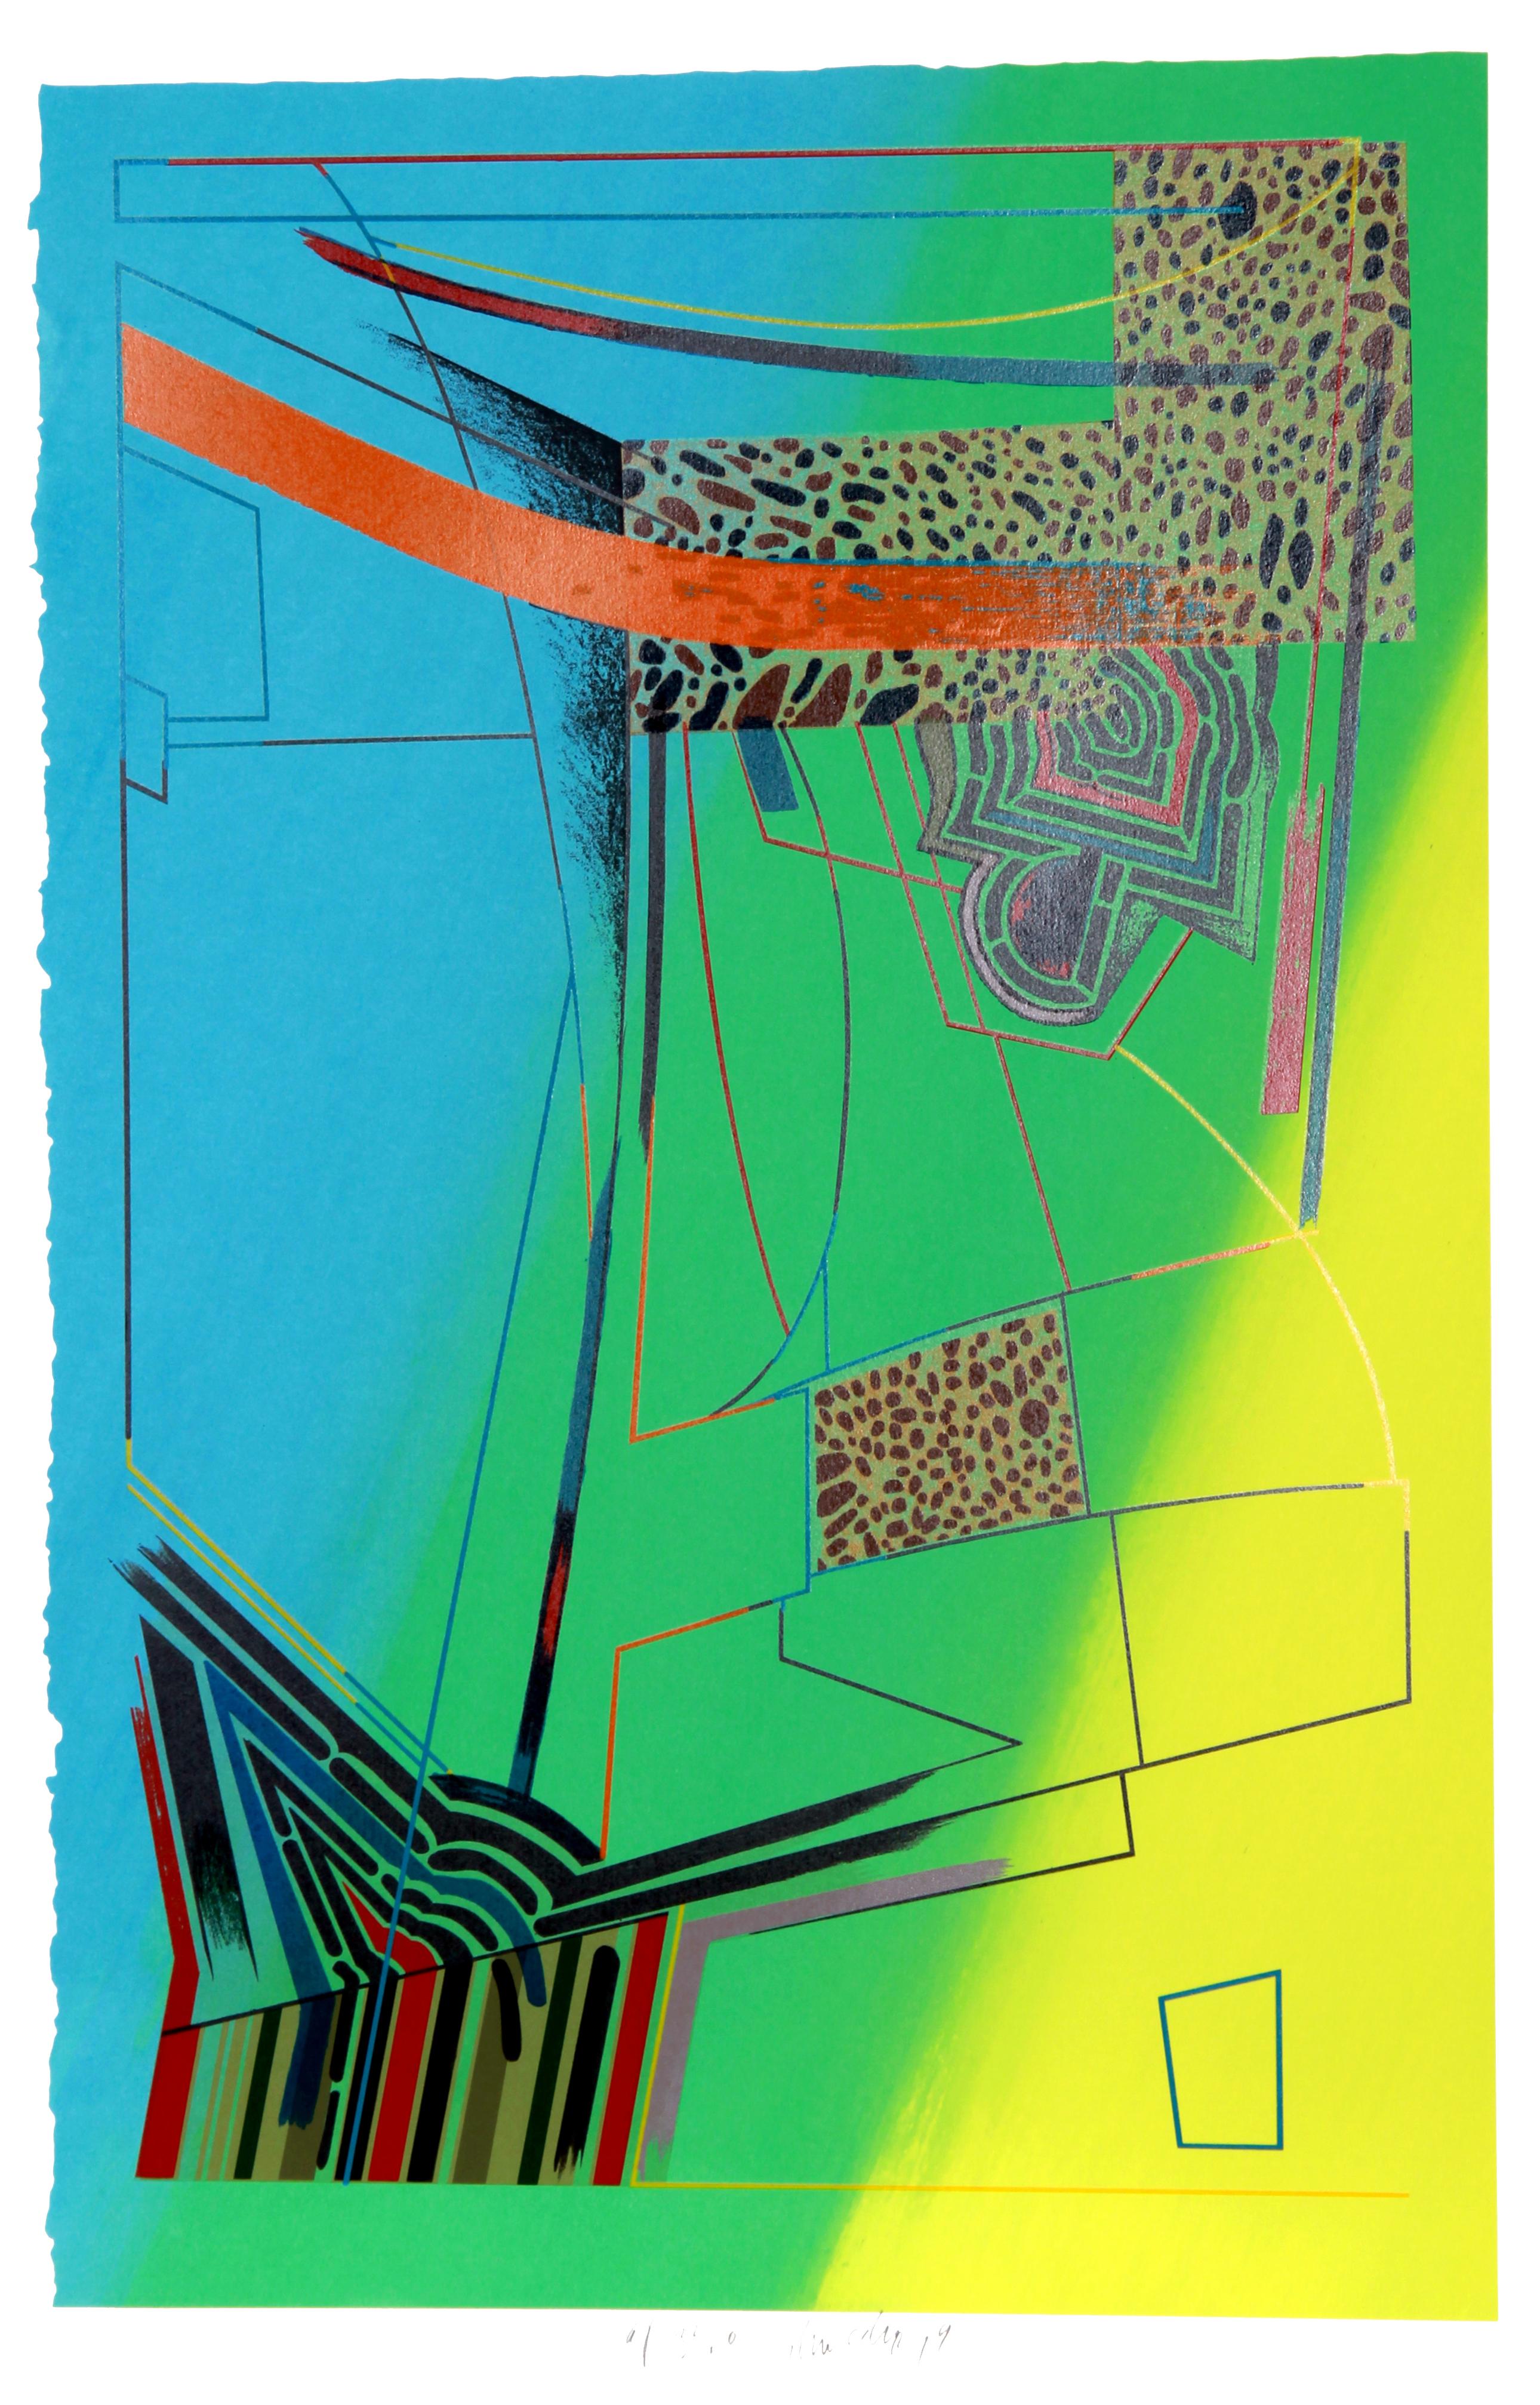 In this vibrant print by William Schwedler, the artist superimposed geometric shapes with animal prints between converging, angled lines over a tricolor diagonal background composed of electric hues of blue, green, and yellow. 

Lost Cause
Artist: 